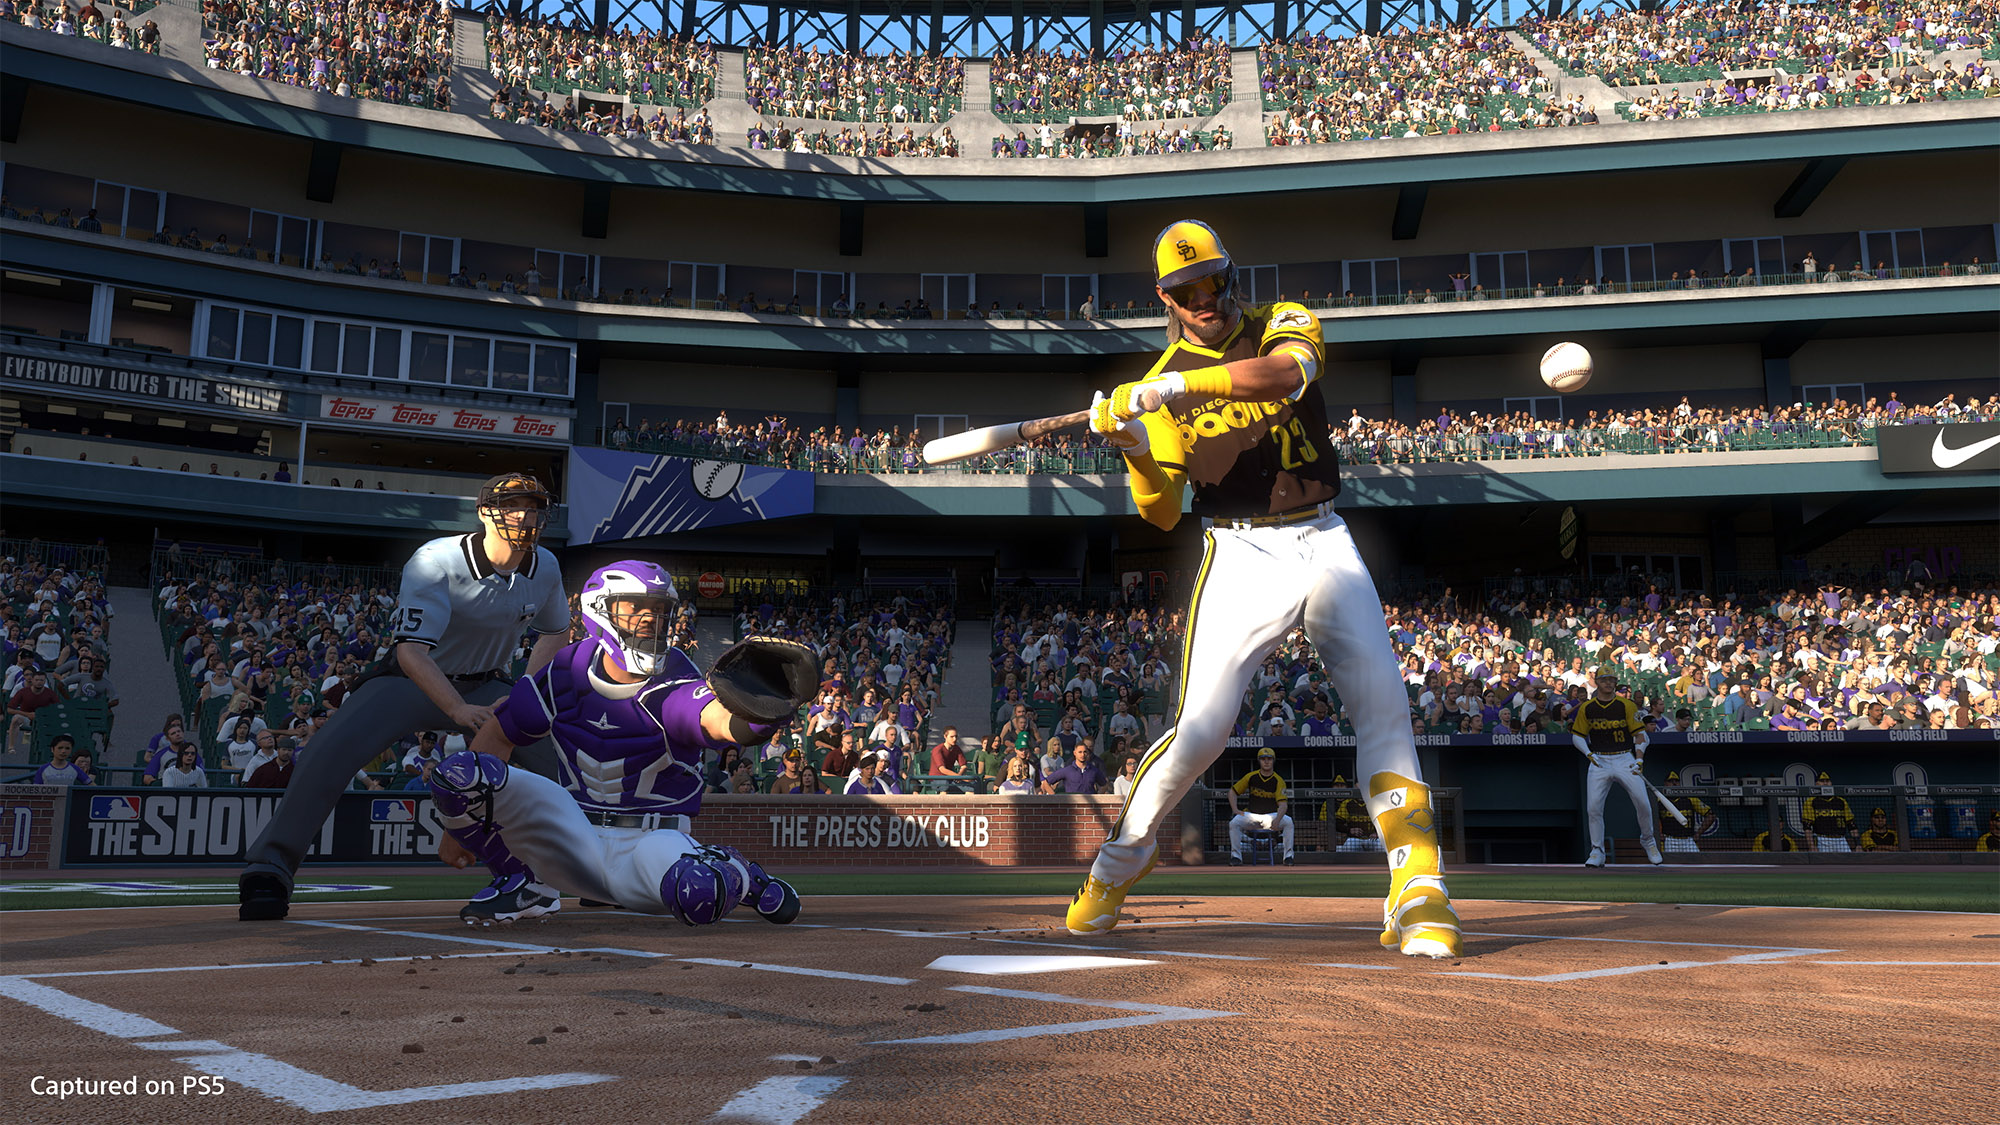 MLB The Show 21 Diamond Dynasty Guide to Getting Started